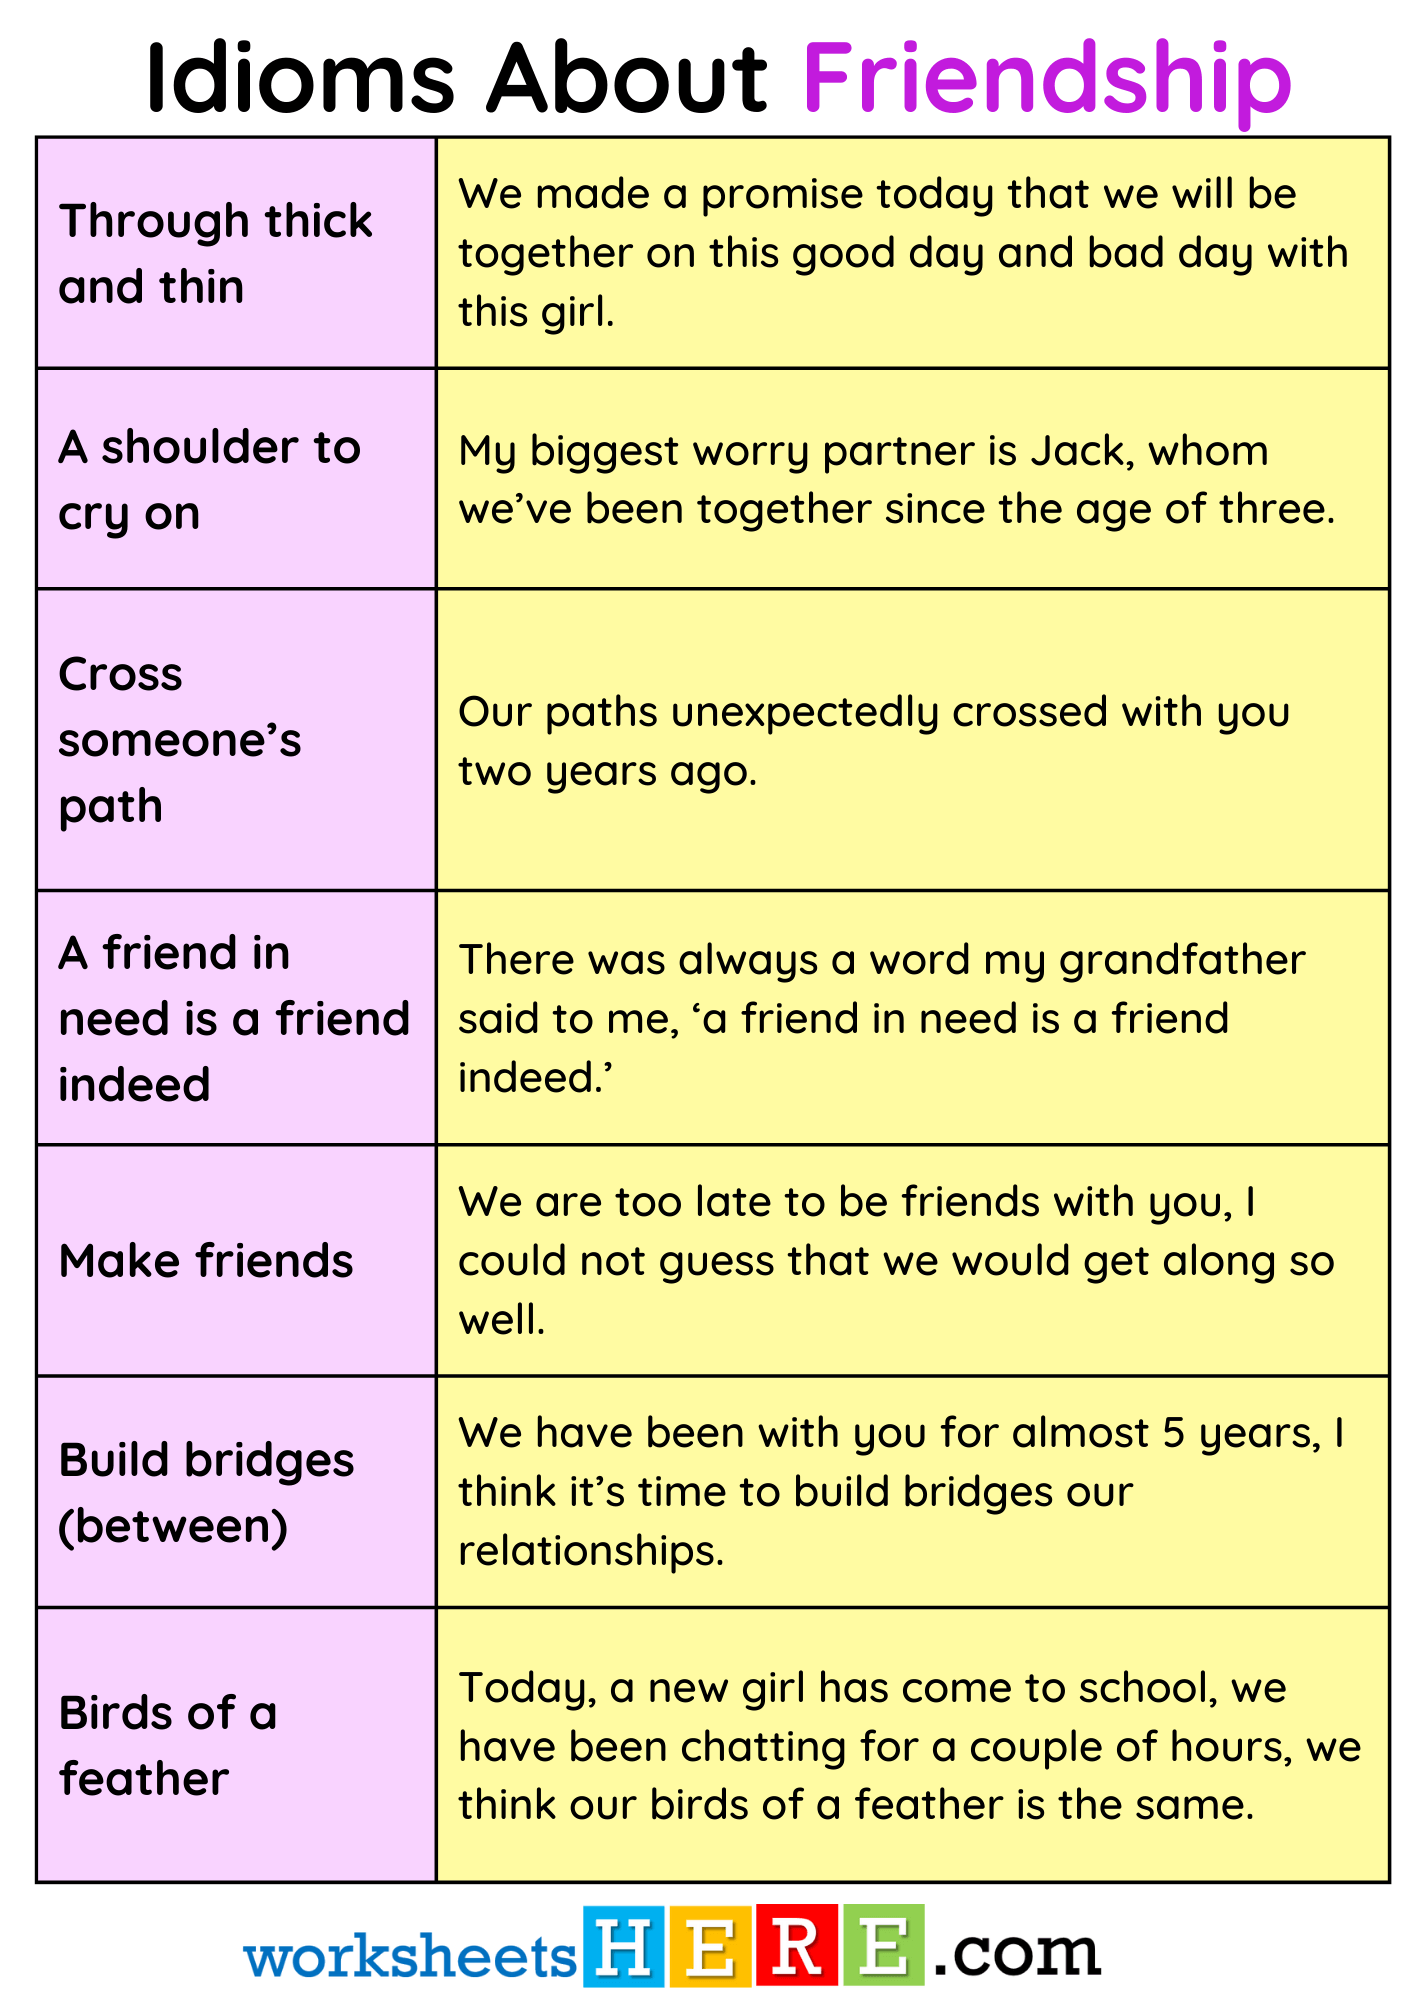 Idioms About Friendship and Example Sentences PDF Worksheet For Students